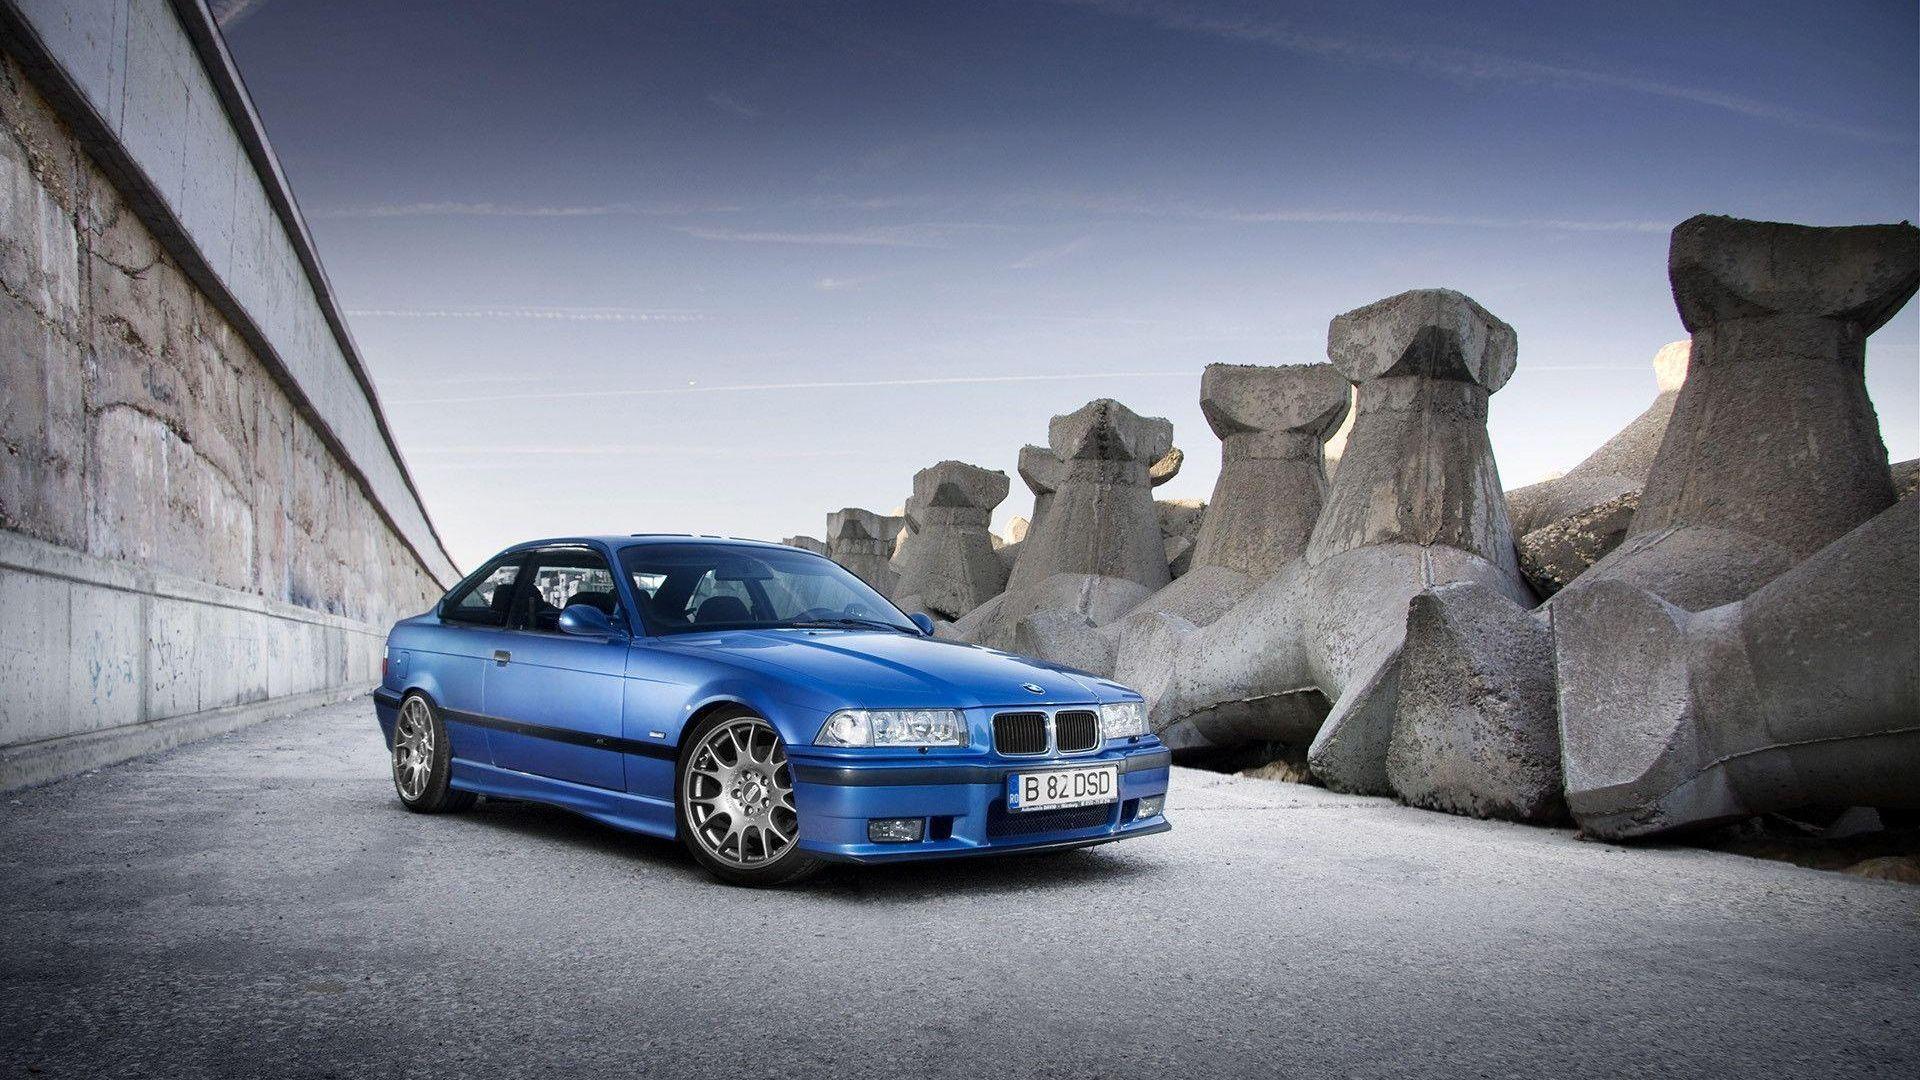 Bmw E36 M3 Wallpapers - Top Free Bmw E36 M3 Backgrounds - Wallpaperaccess